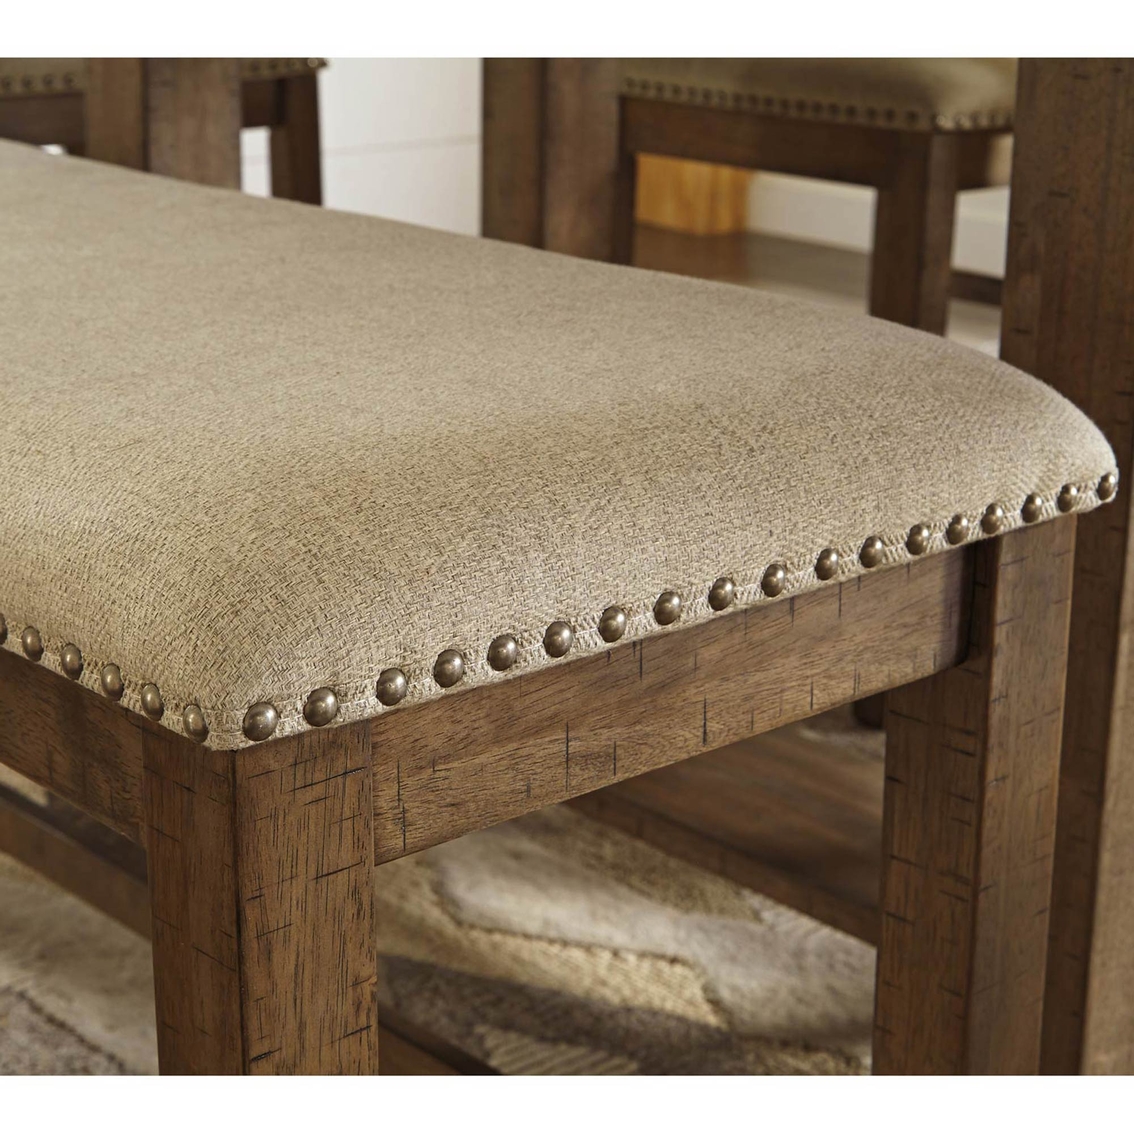 Signature Design by Ashley Moriville Double Upholstered Bench - Image 3 of 4